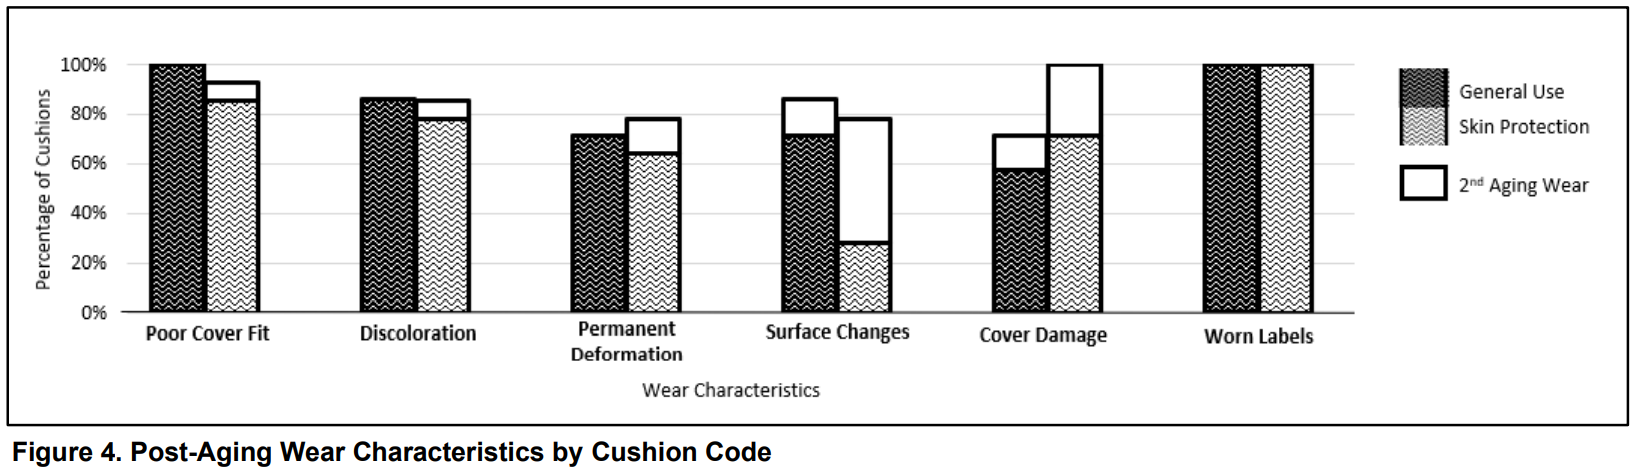 Figure 4. Post-Aging Wear Characteristics by Cushion Code